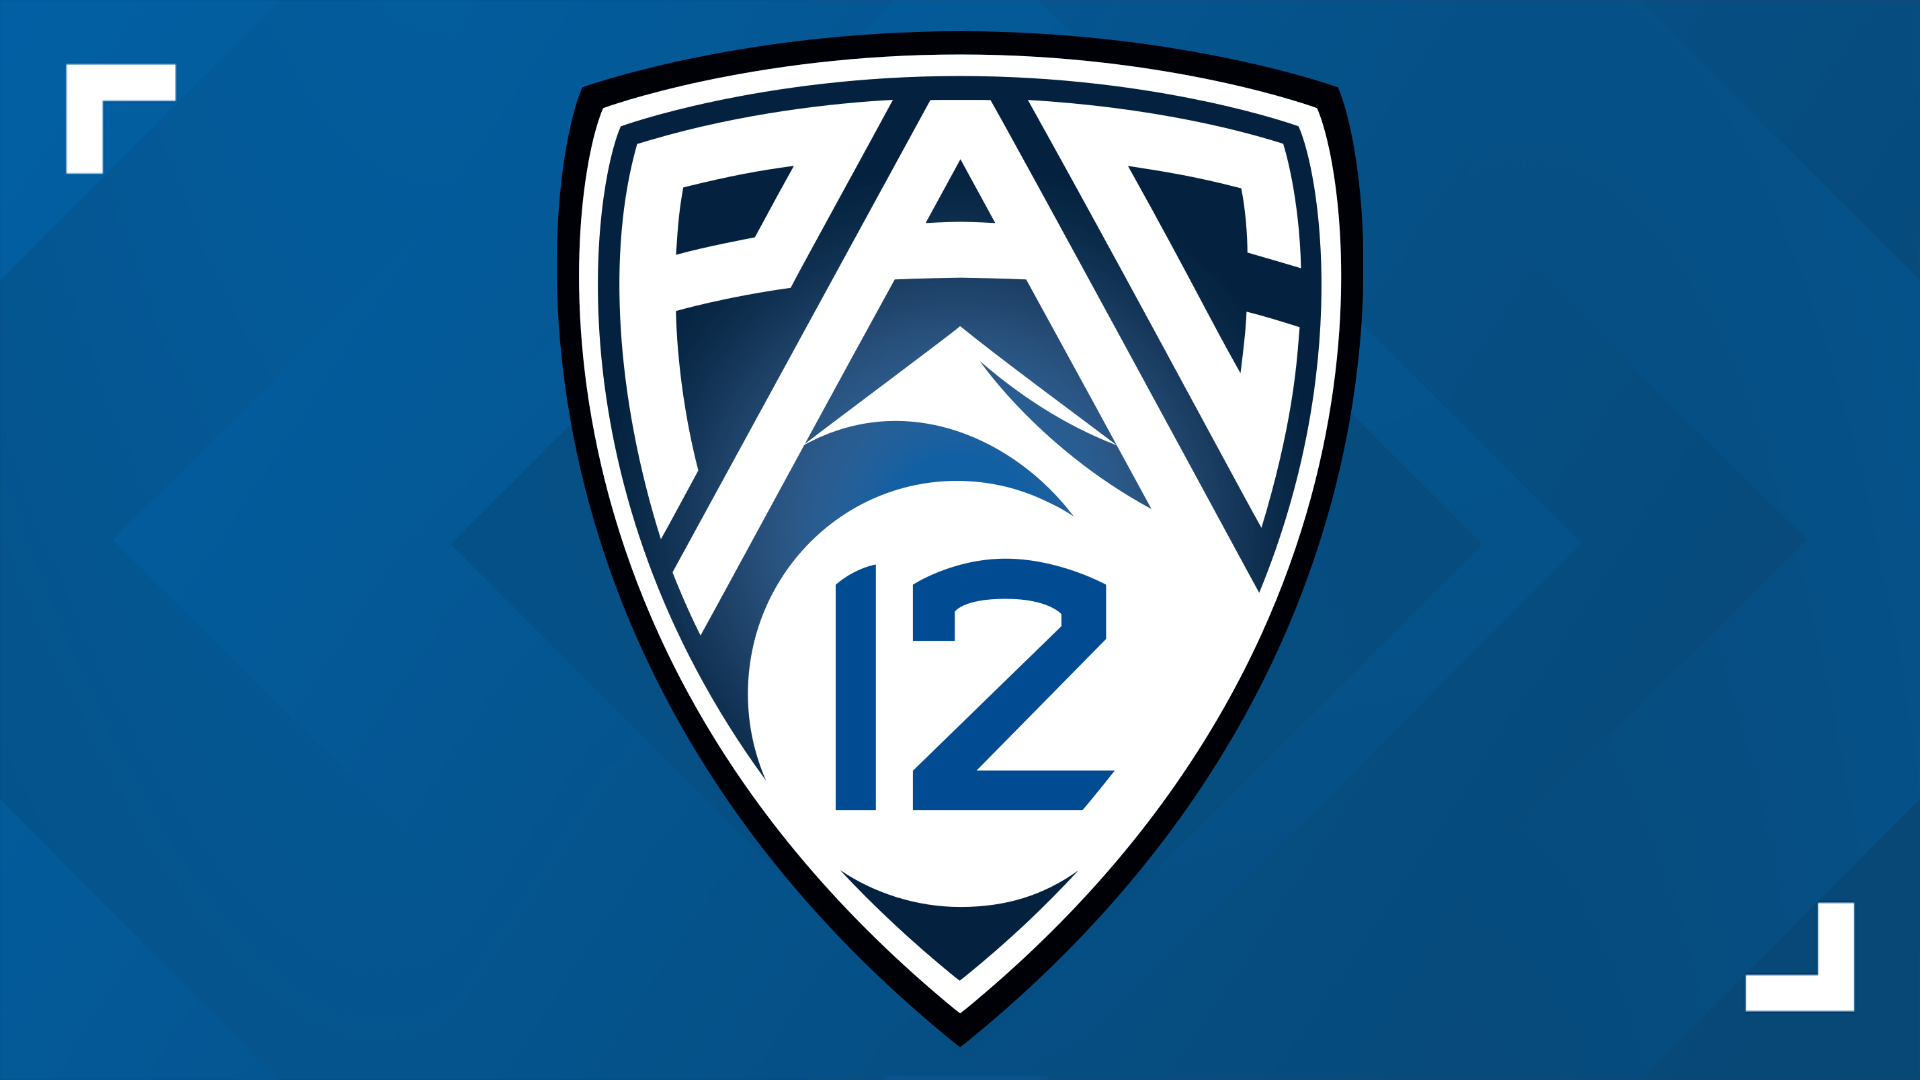 The Pac-12 announced Thursday afternoon that the presidents of the Pac-12 schools have voted to start the conference's football season on Nov. 6.